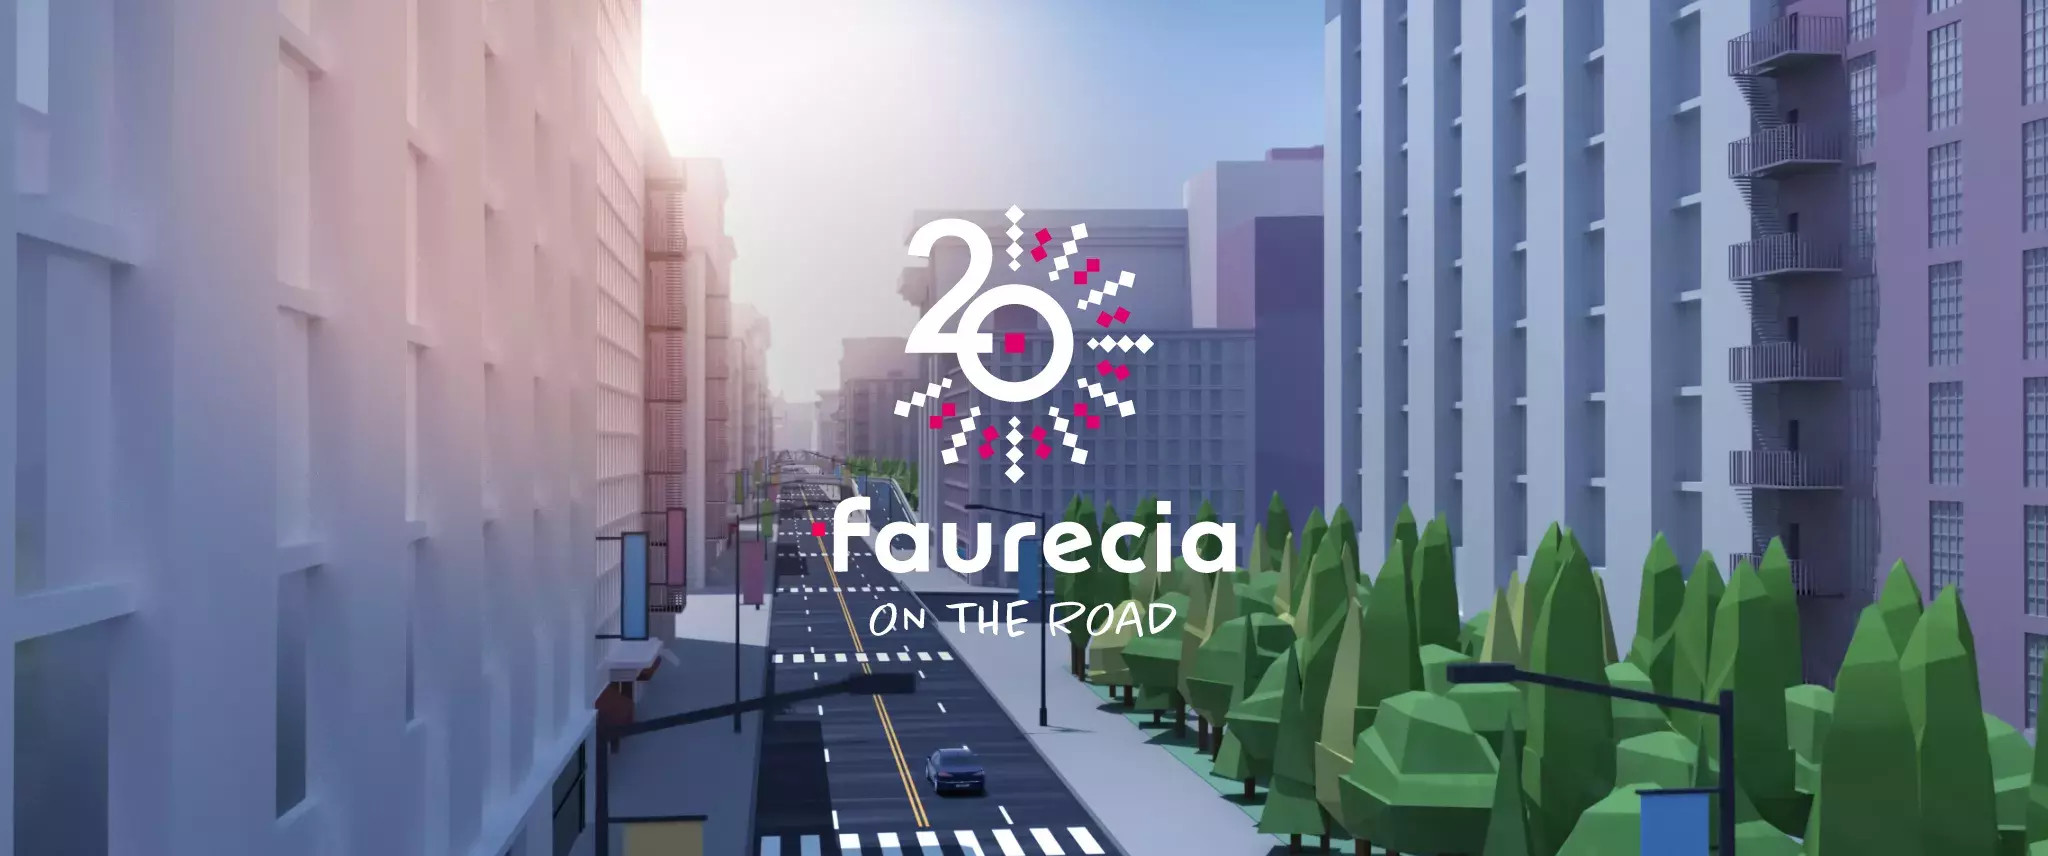 Faurecia 20 years on the road